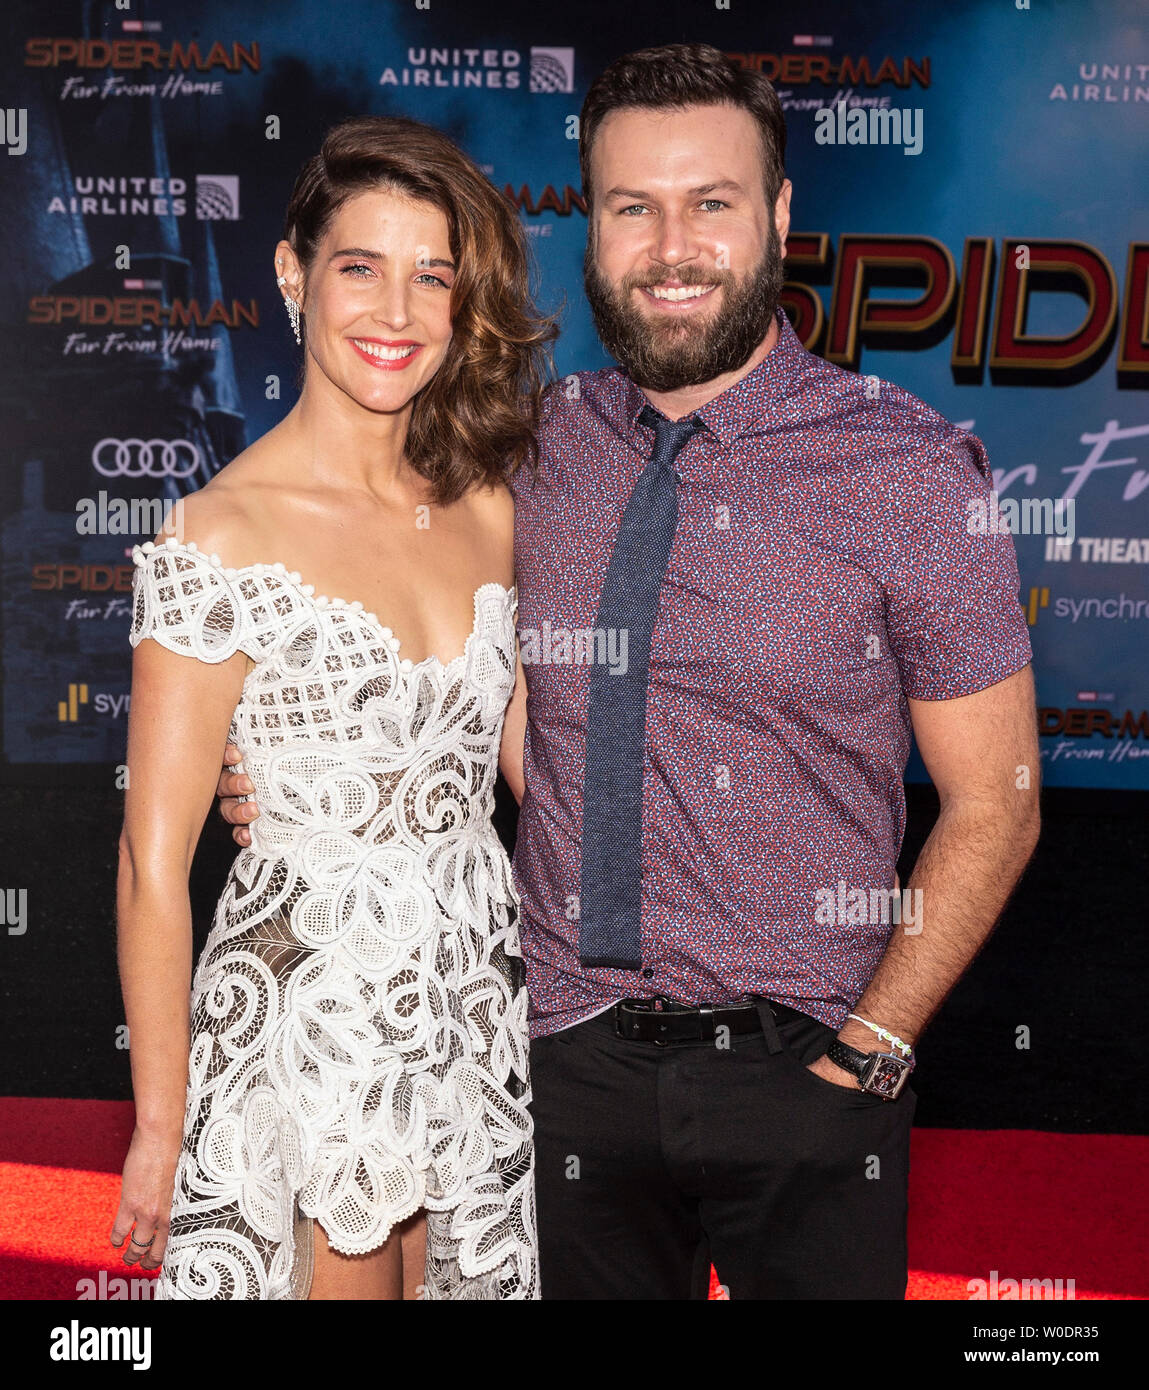 Los Angeles, CA - June 26, 2019: Cobie Smulders and Taran Killam attend the  premiere of Sony Pictures "Spider-Man Far From Home" held at TCL Chinese T  Stock Photo - Alamy